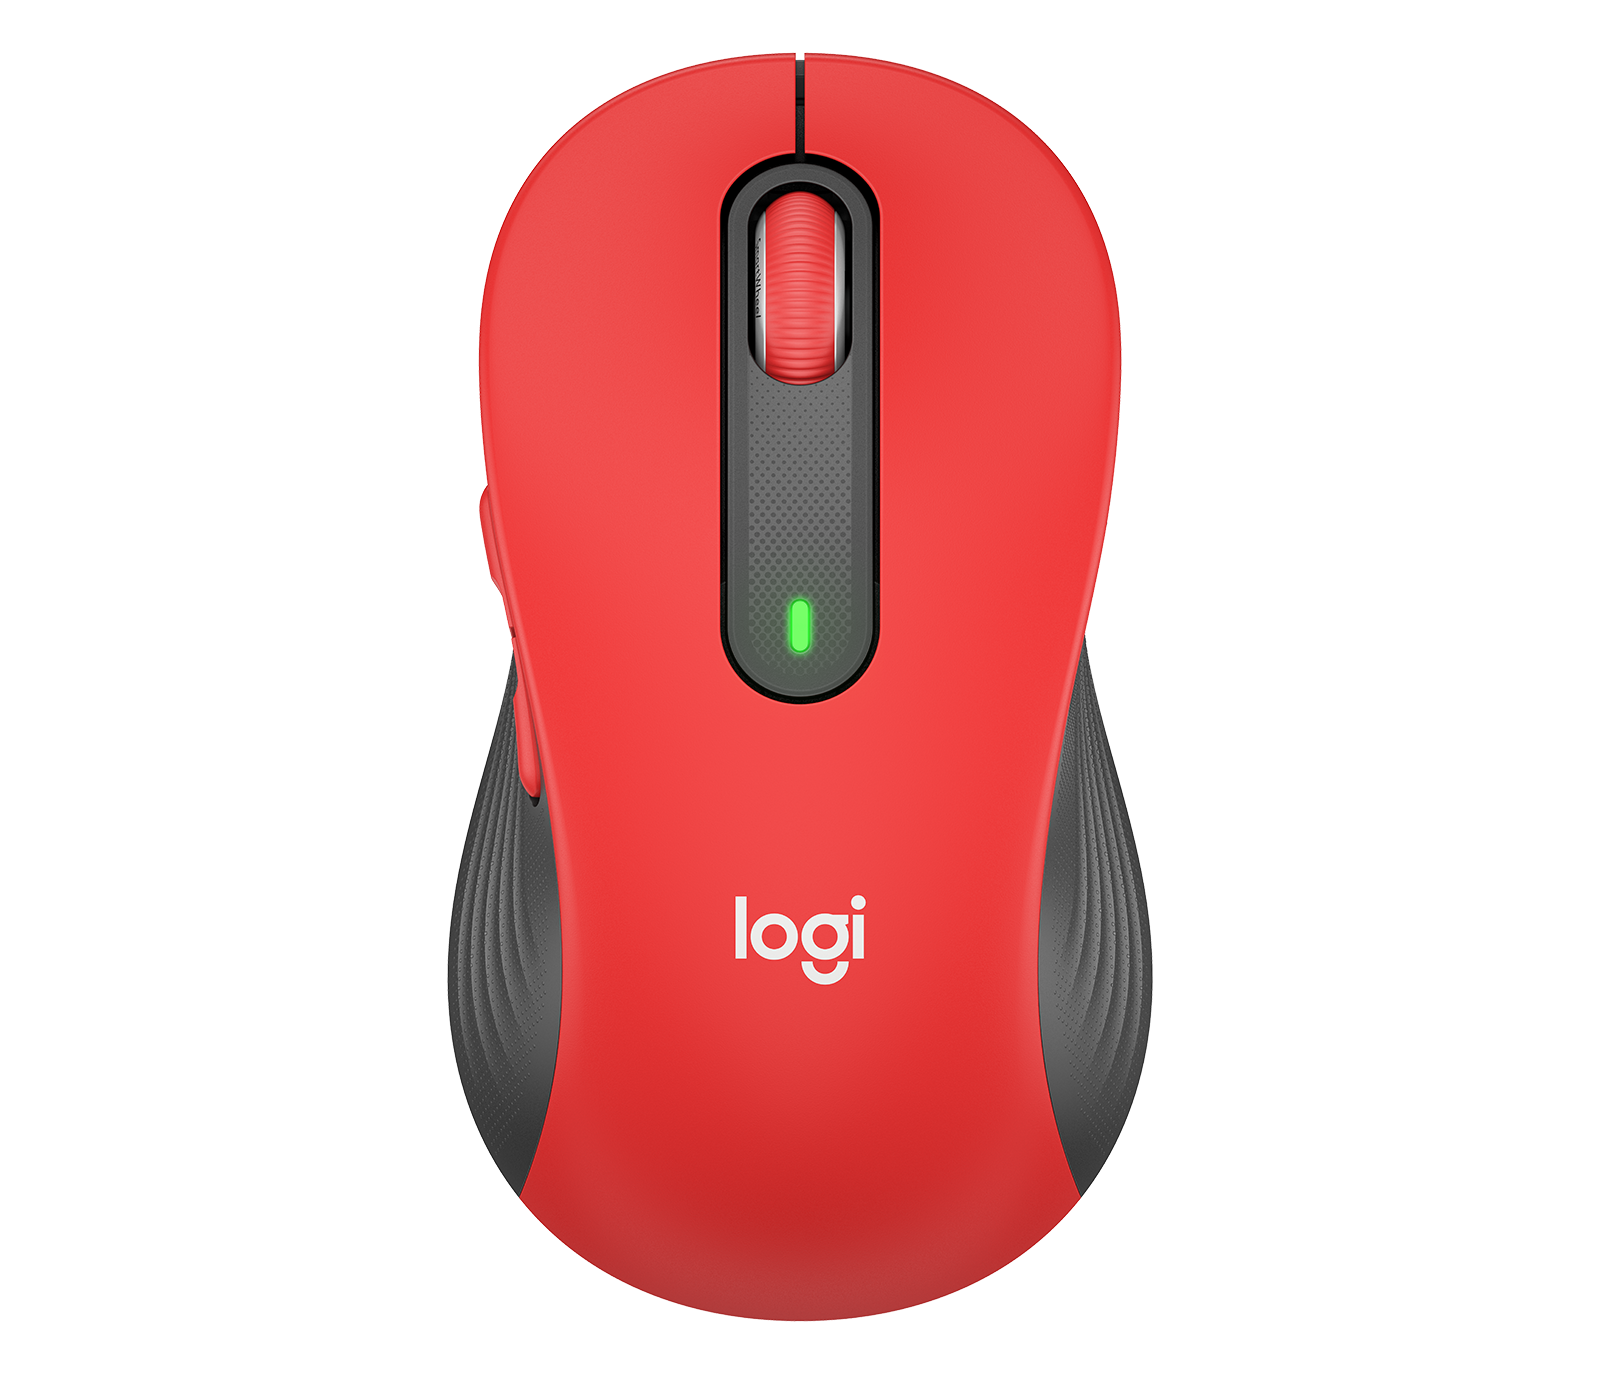 Hollow Erhverv Glamour Logitech M650 Wireless Mice - Small, Large, Left Handed Mouse